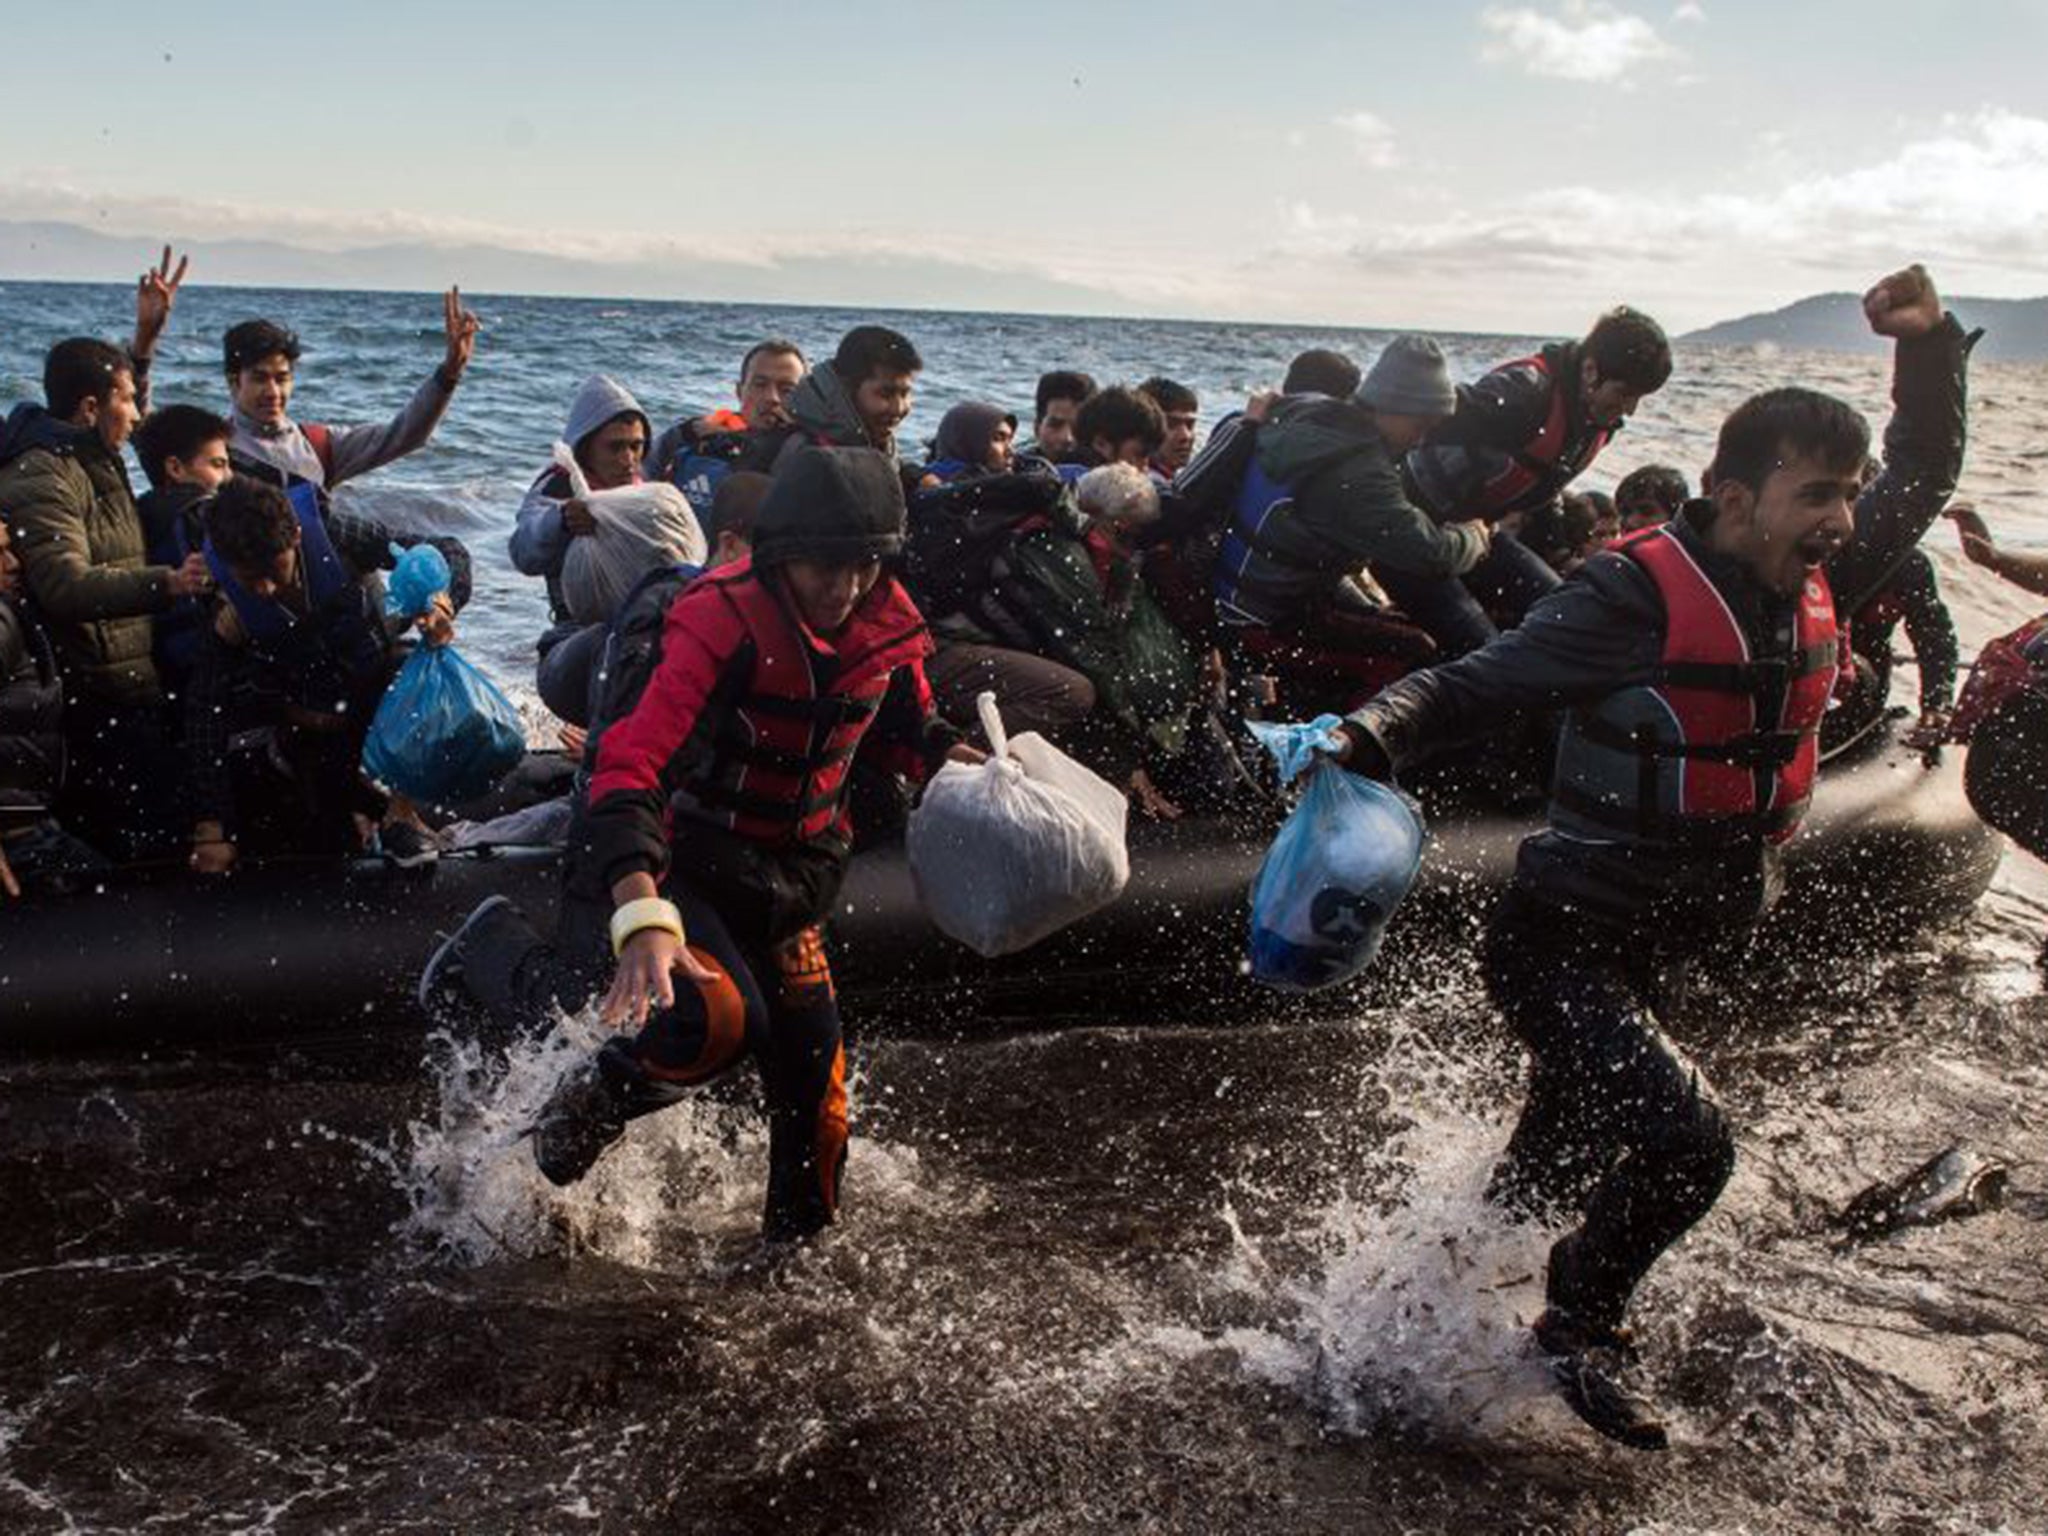 Refugees embark from a dinghy on the shores on Lesbos